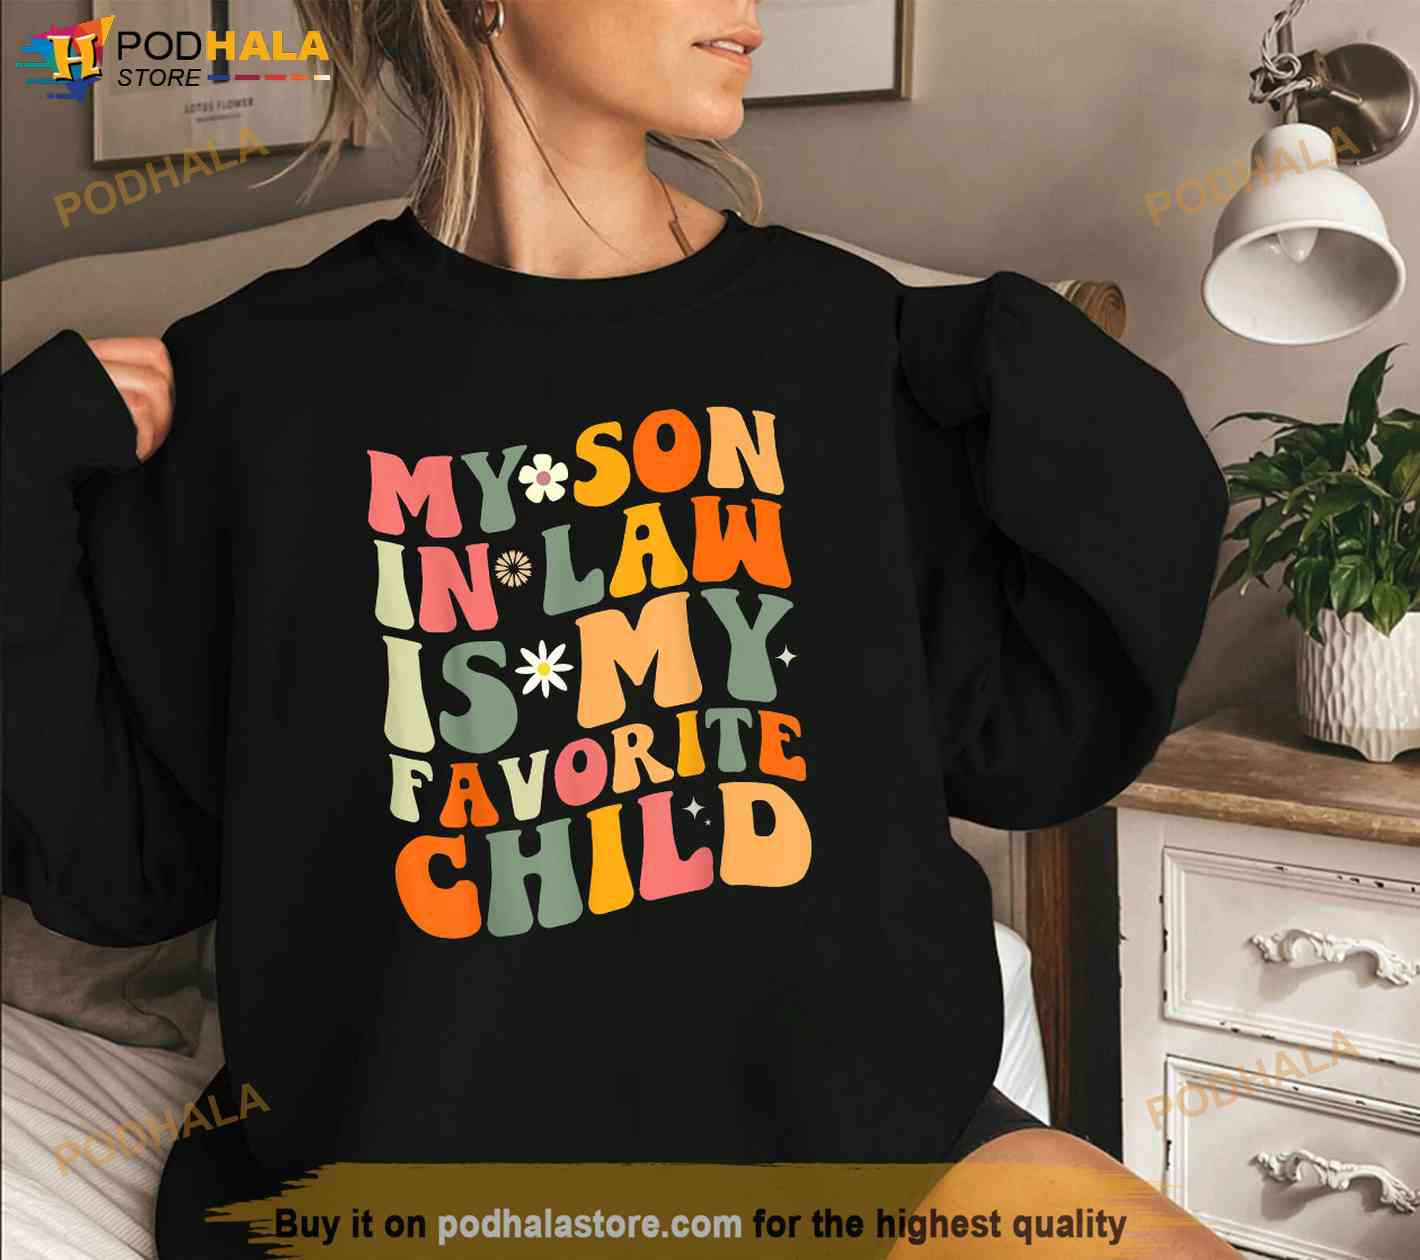 My SonInLaw Is My Favorite Child Funny Mom Shirt - Bring Your